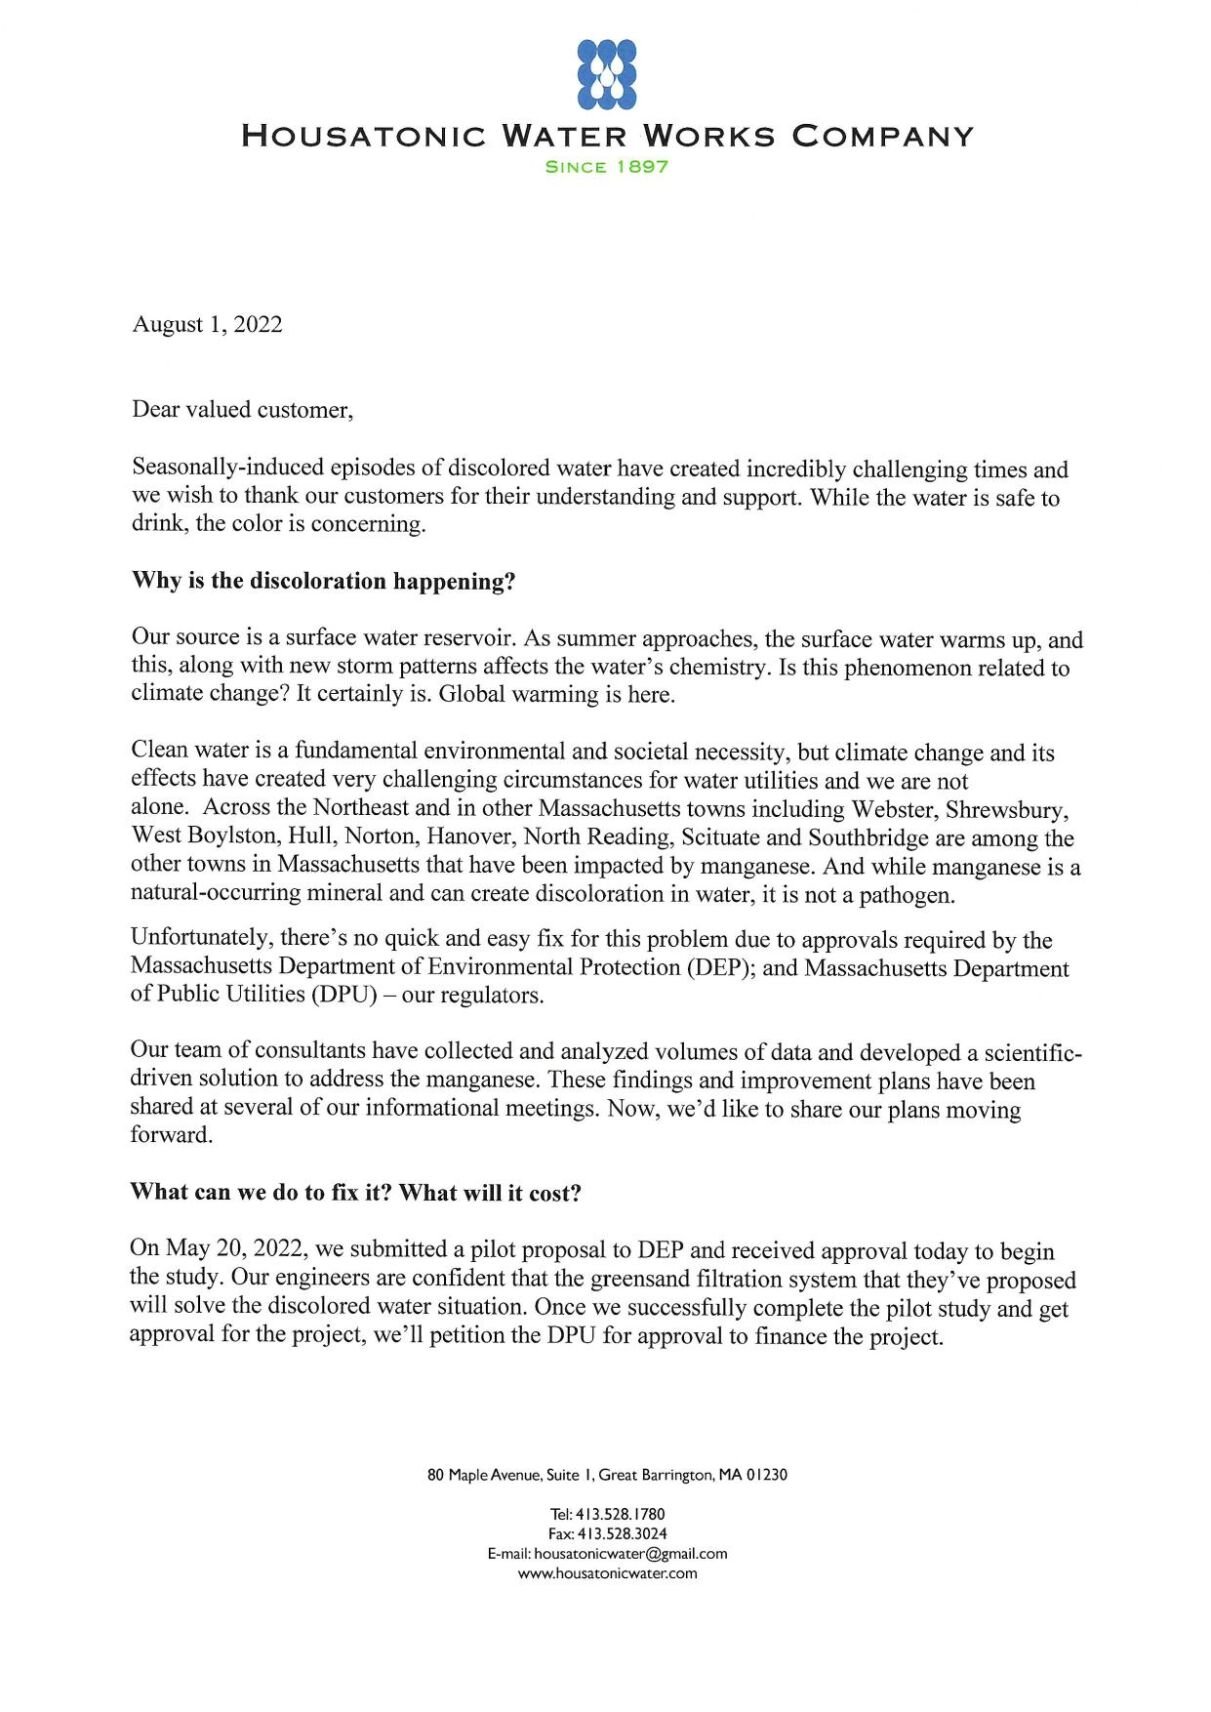 Housatonic Water Works Co. Aug. 1 letter